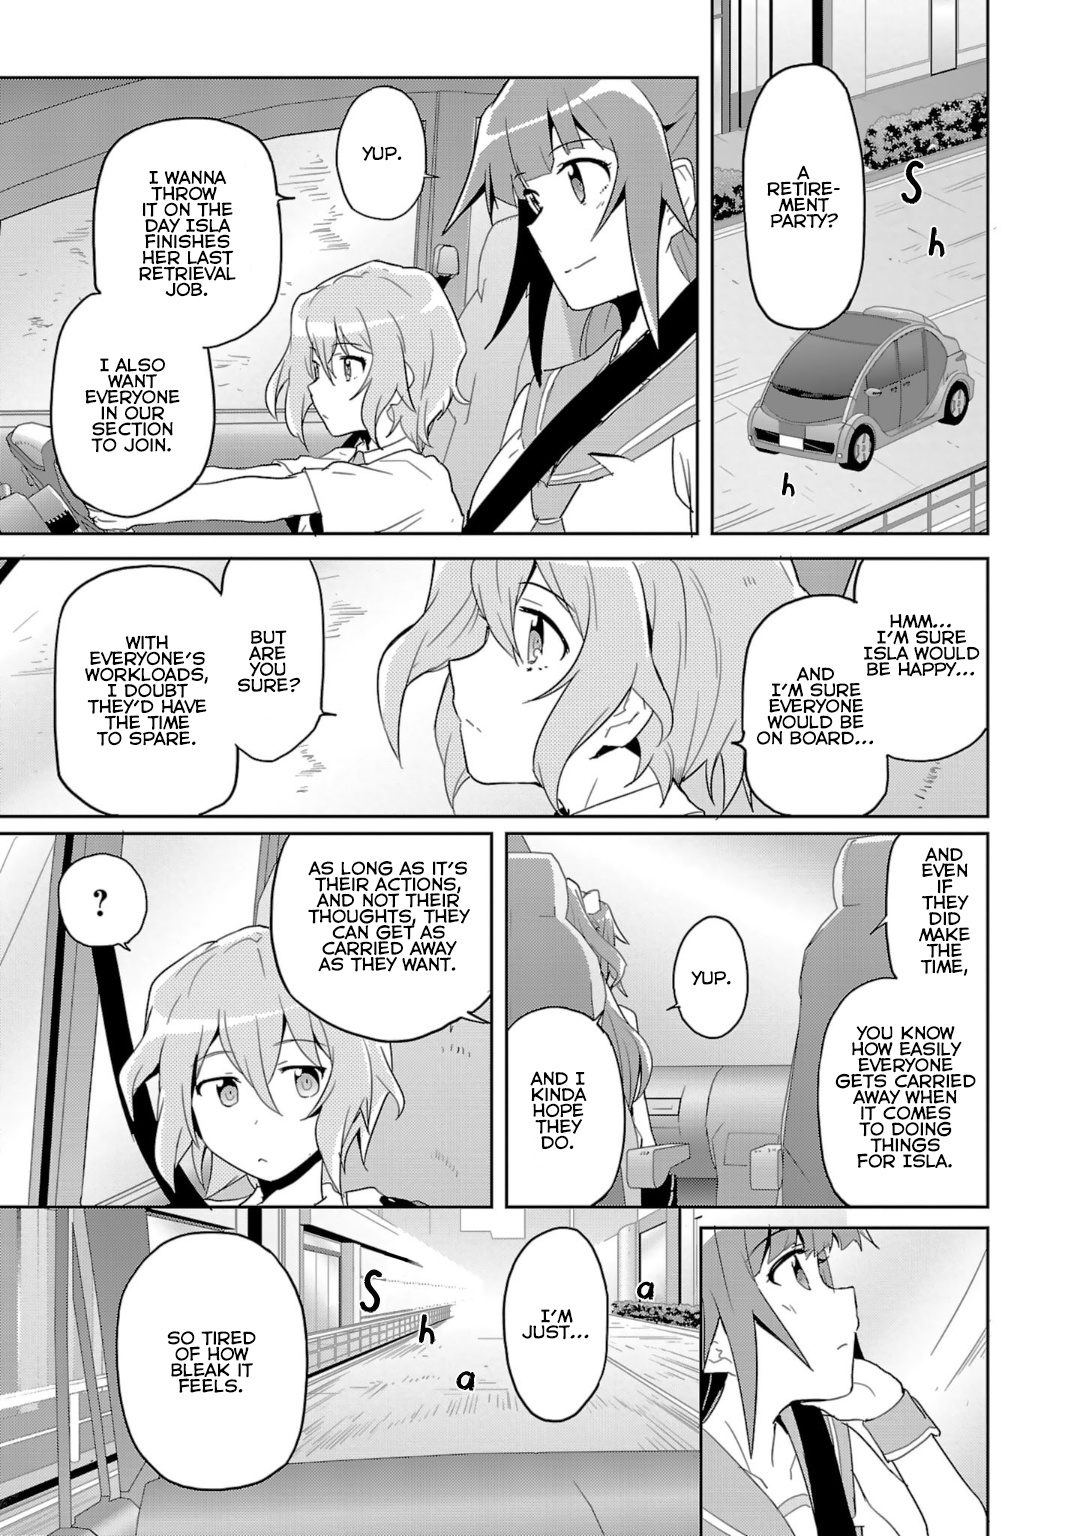 Plastic Memories - Say To Good-Bye Vol.3 Chapter 16: Memories: 16 - Picture 3